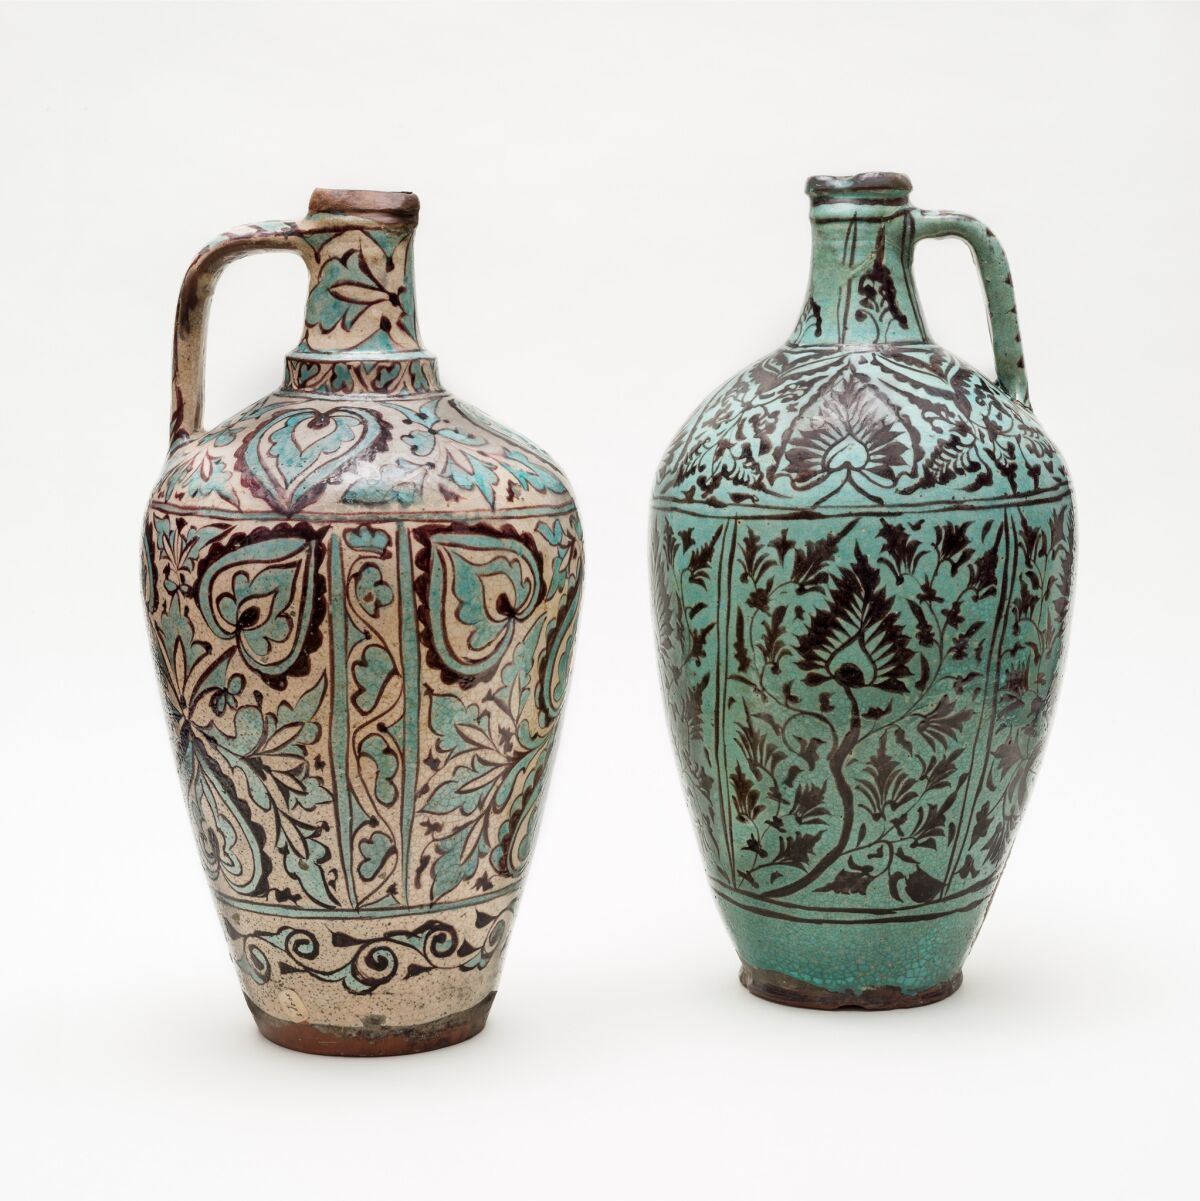 Also from Iran or Central Asia is this pair of earthenware jugs. These were featured in the first exhibition of Islamic art in Europe in 1910. Interestingly, painter Henri Matisse was a visitor to that show.